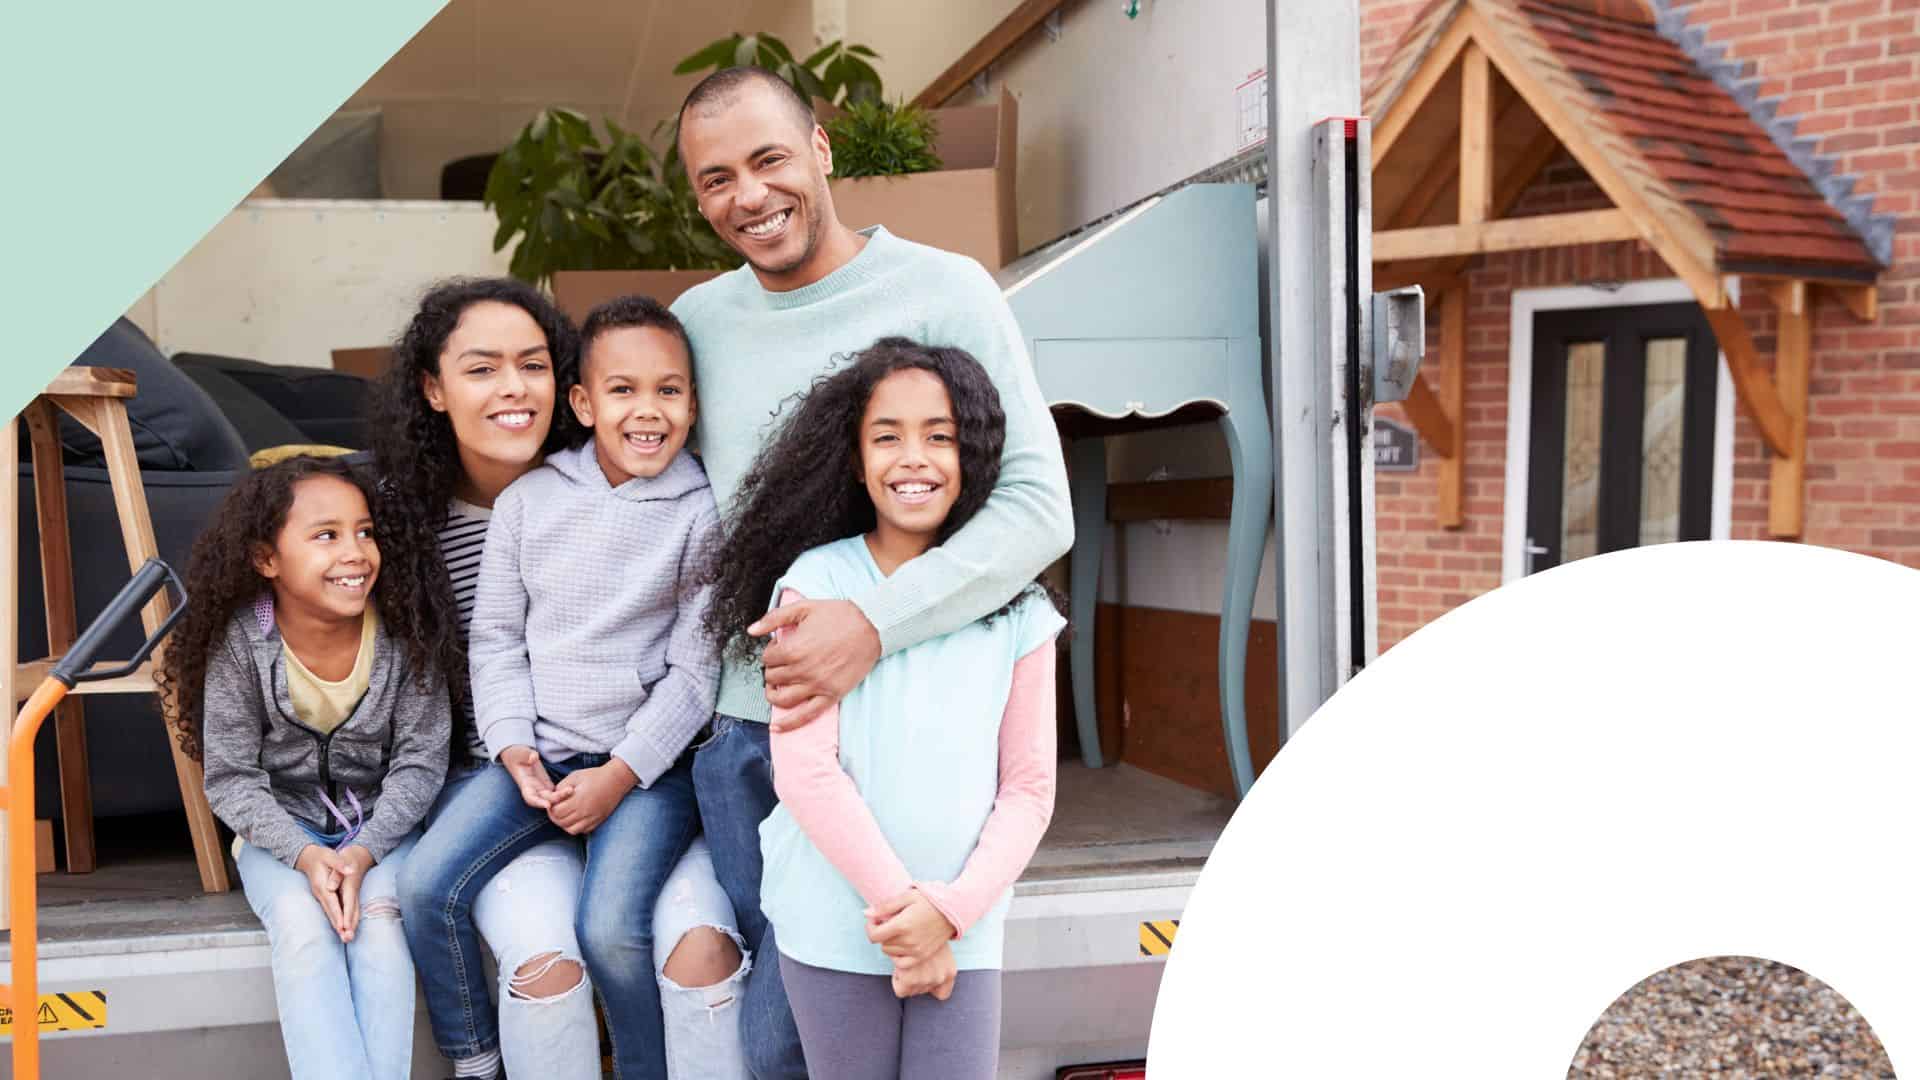 Make your home move happen with London Mutual Credit Union Mortgages